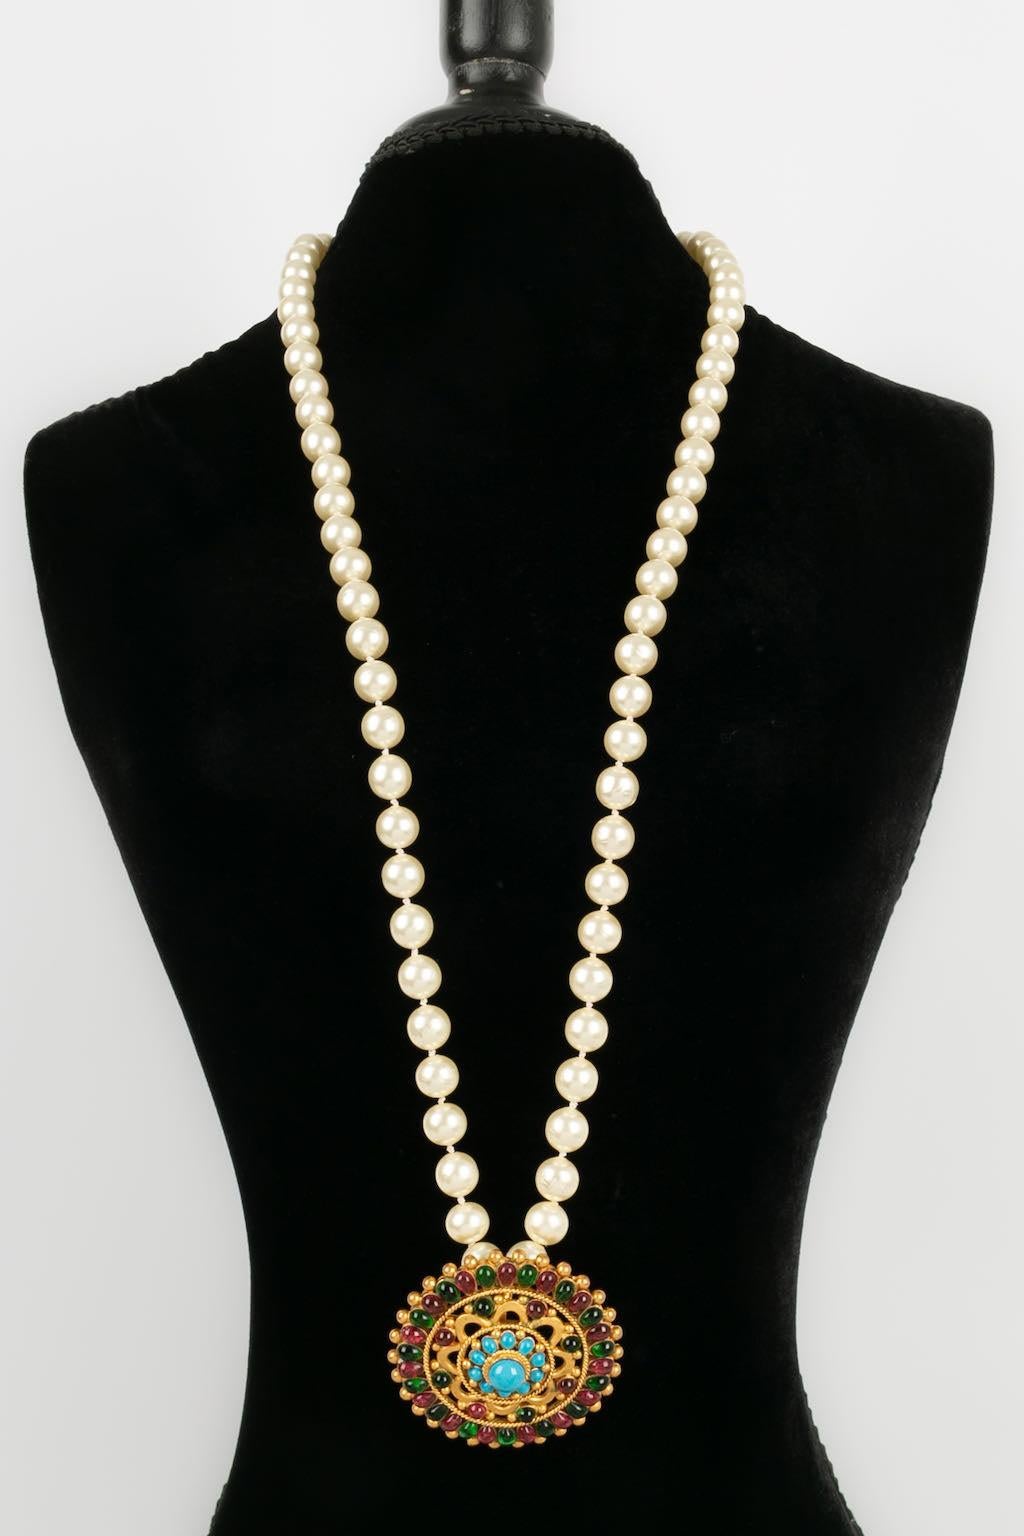 Chanel -(Made in France) Necklace with pearls and a brooch in gold metal and glass paste. Fall-Winter 1996 collection.

Additional information: 
Dimensions: Length : 98 cm - Diameter : 6 cm
Condition: Very good condition
Seller Ref number: CB43